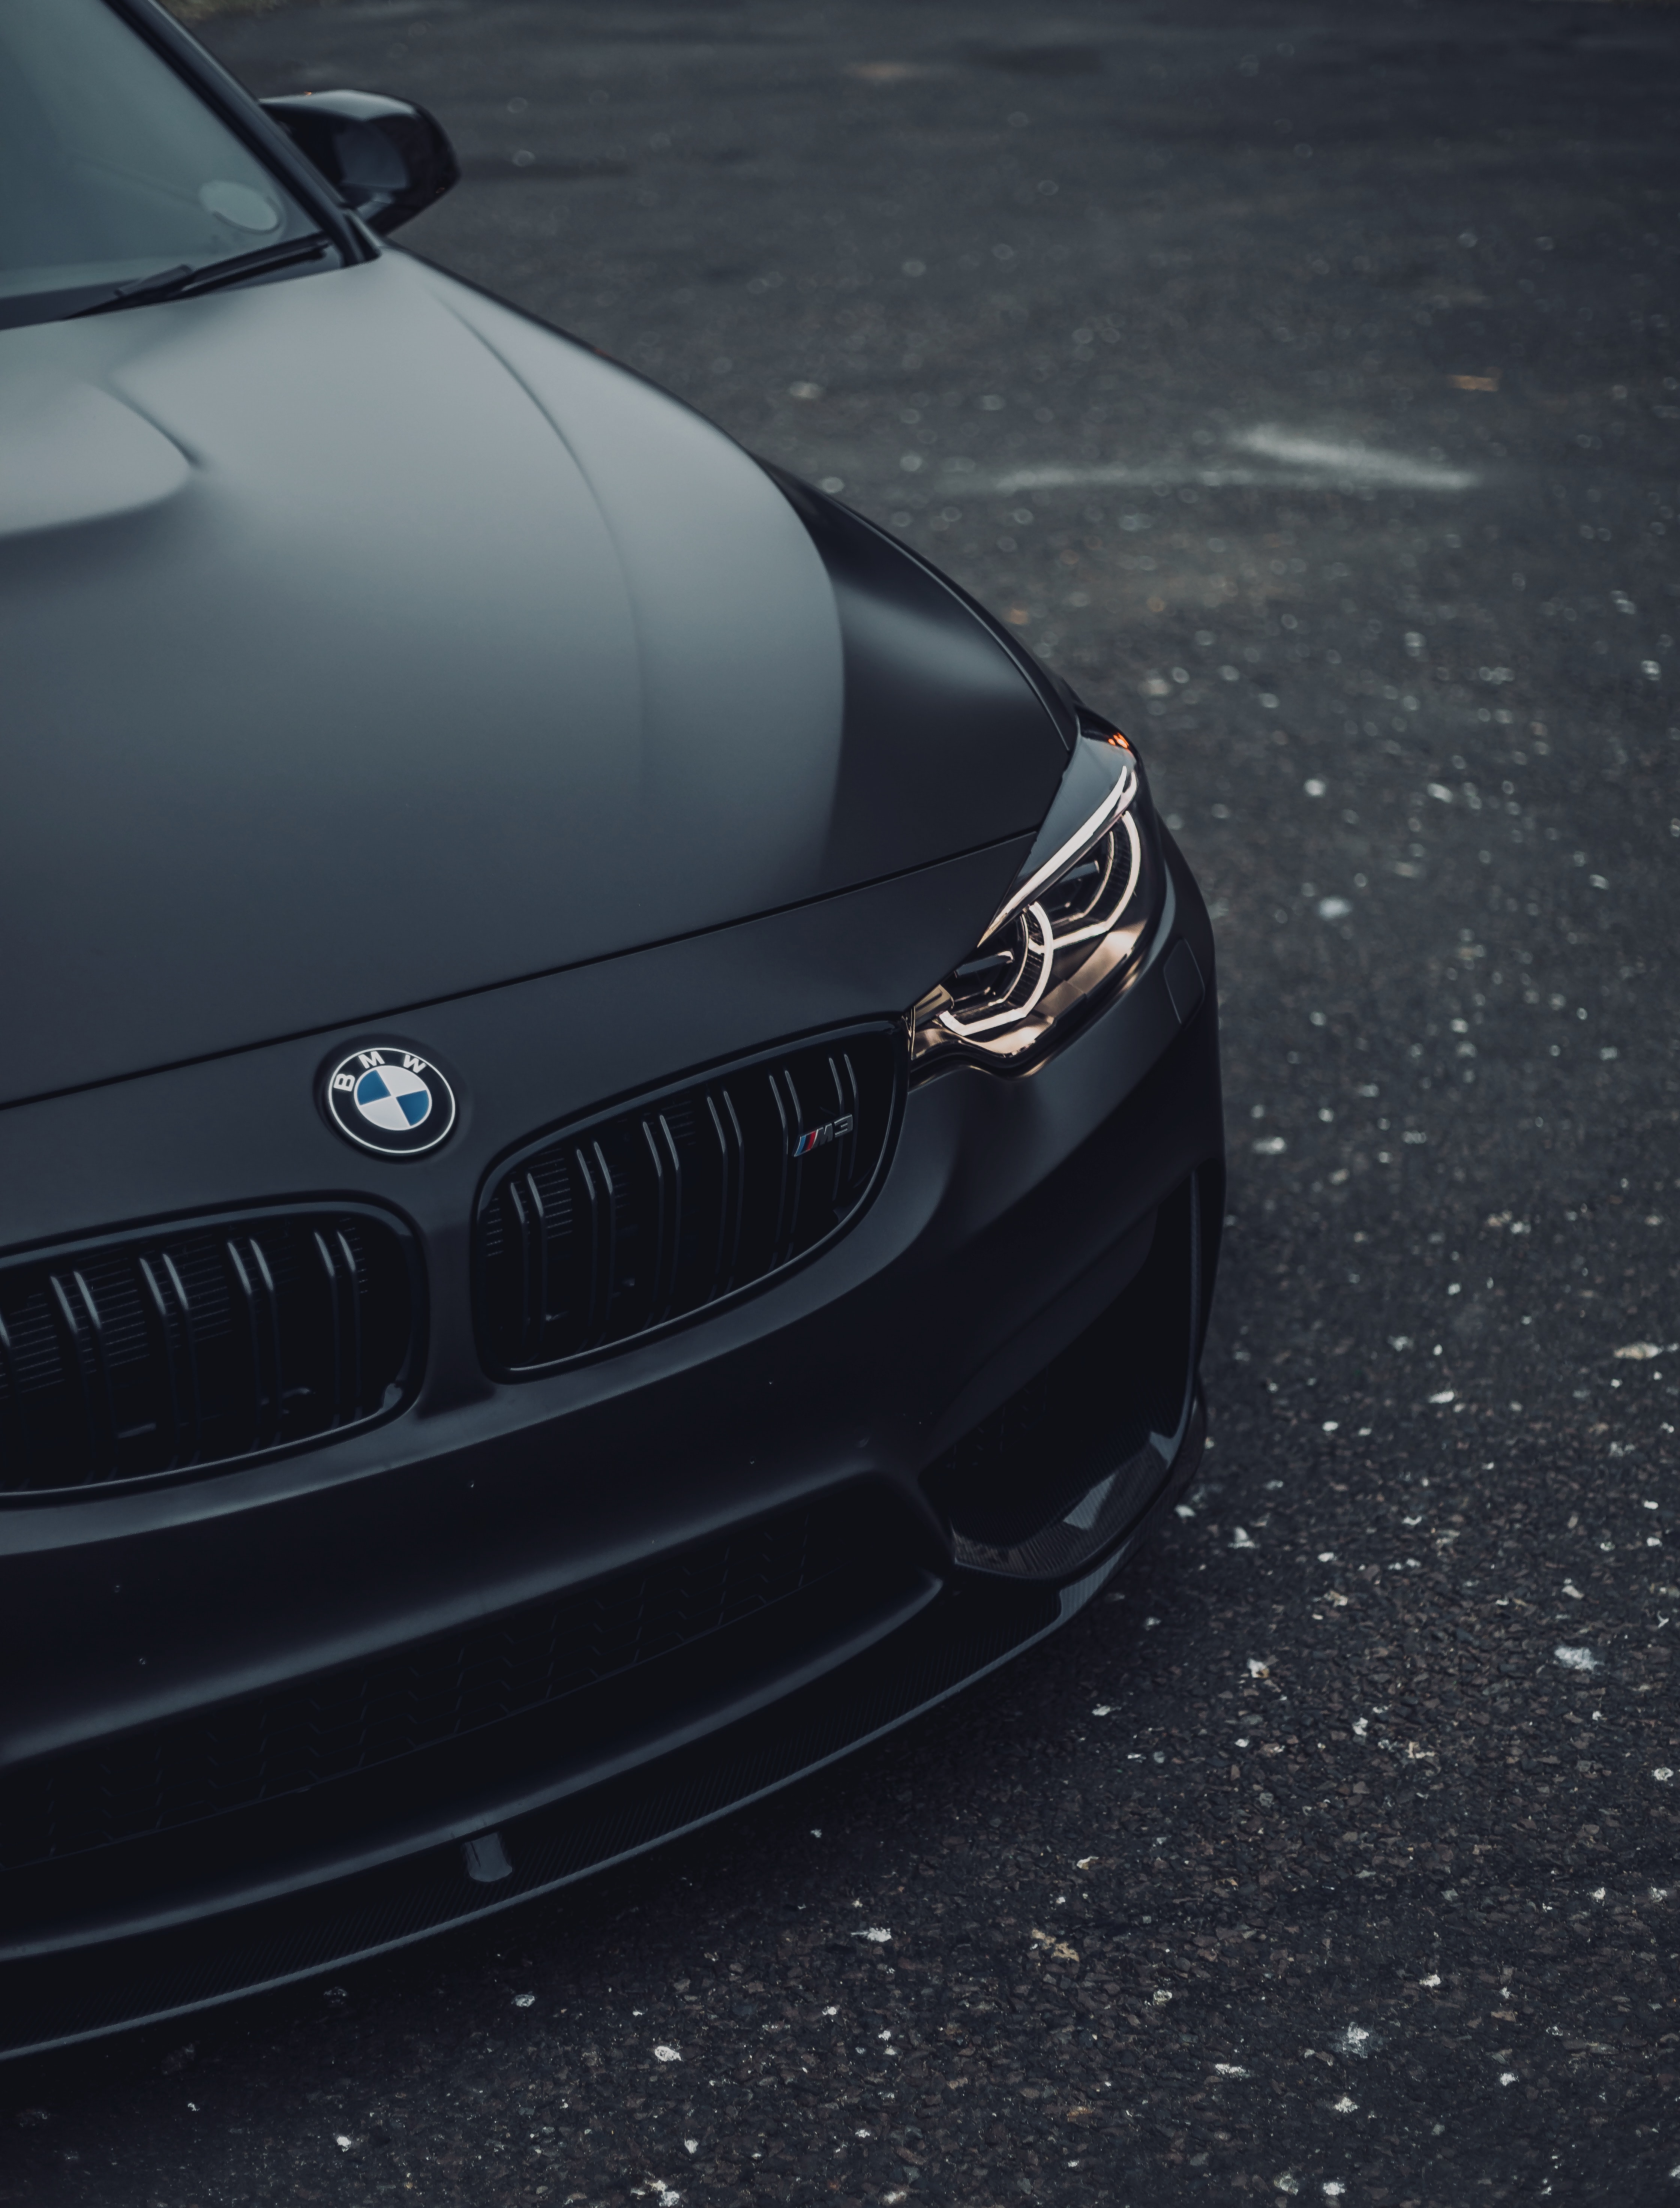 Bmw Cell Phone Wallpapers